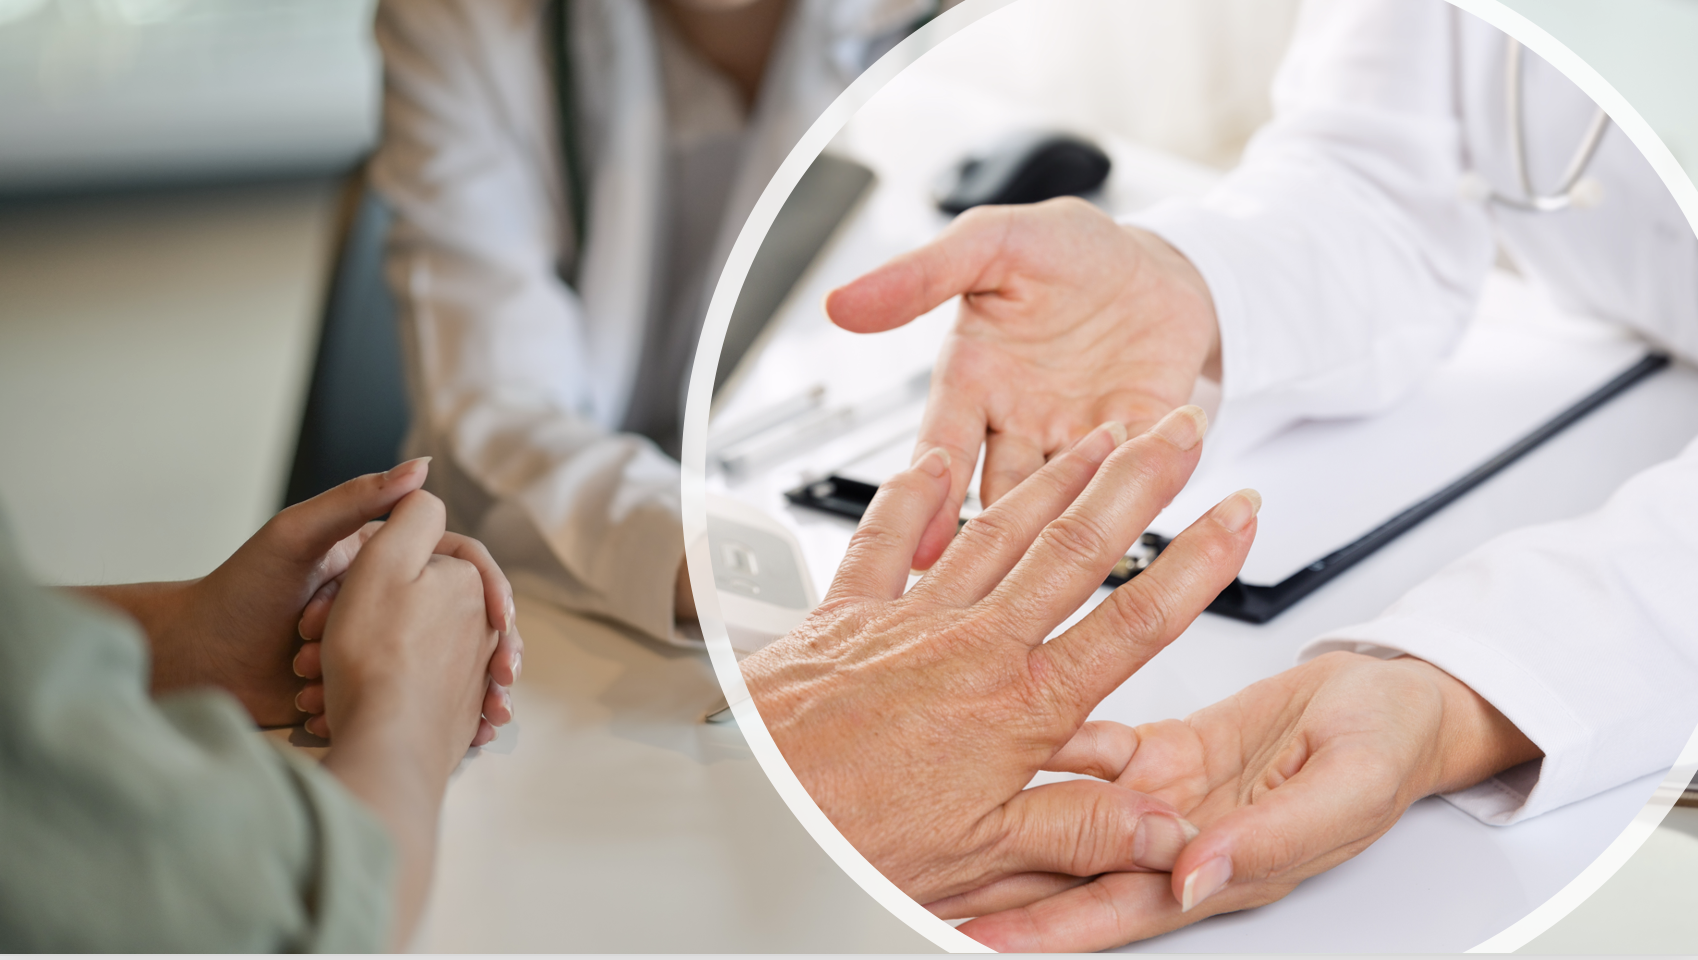 Patients With Rheumatoid Arthritis Report Inconsistent Medicare Claims History